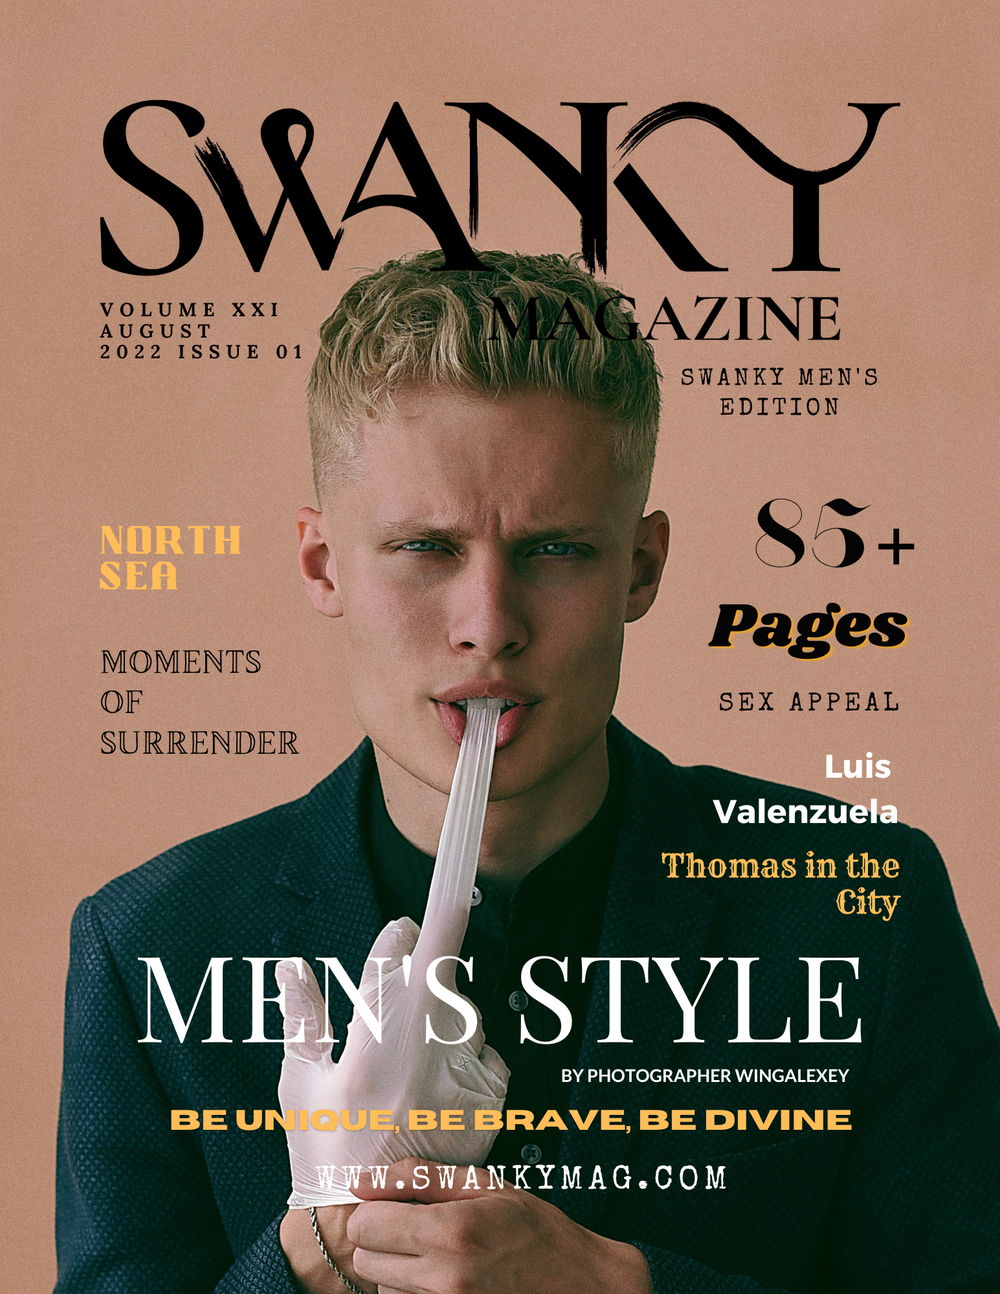 Swanky Men's AUGUST 2022 VOL XXI Issue 3 - PRINT ISSUE